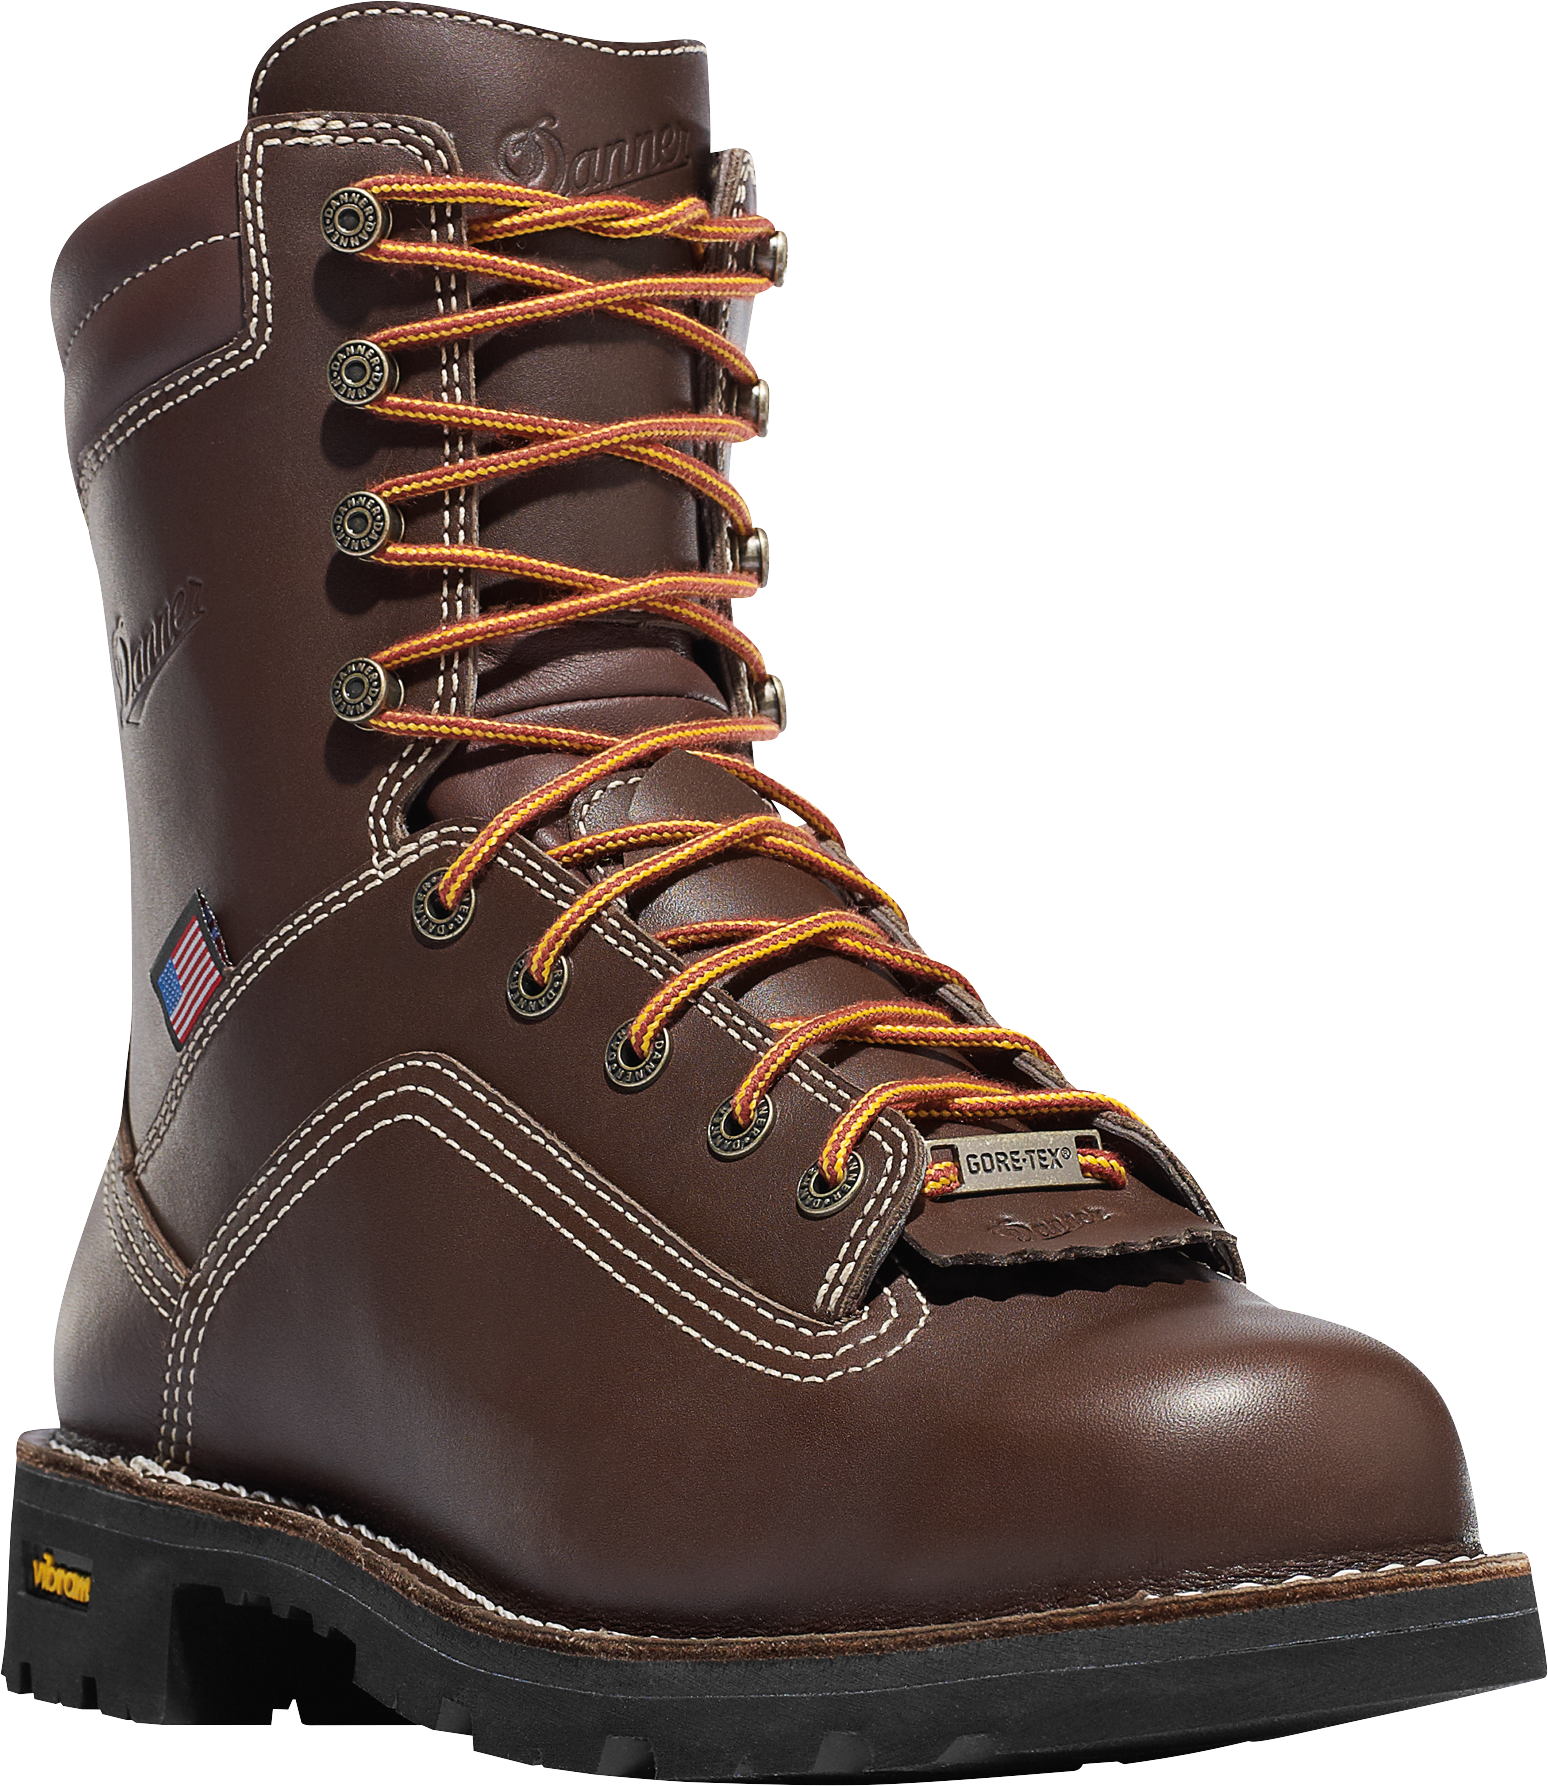 Danner Quarry USA Brown GORE-TEX Alloy Toe Work Boots for Men - Brown - 10M